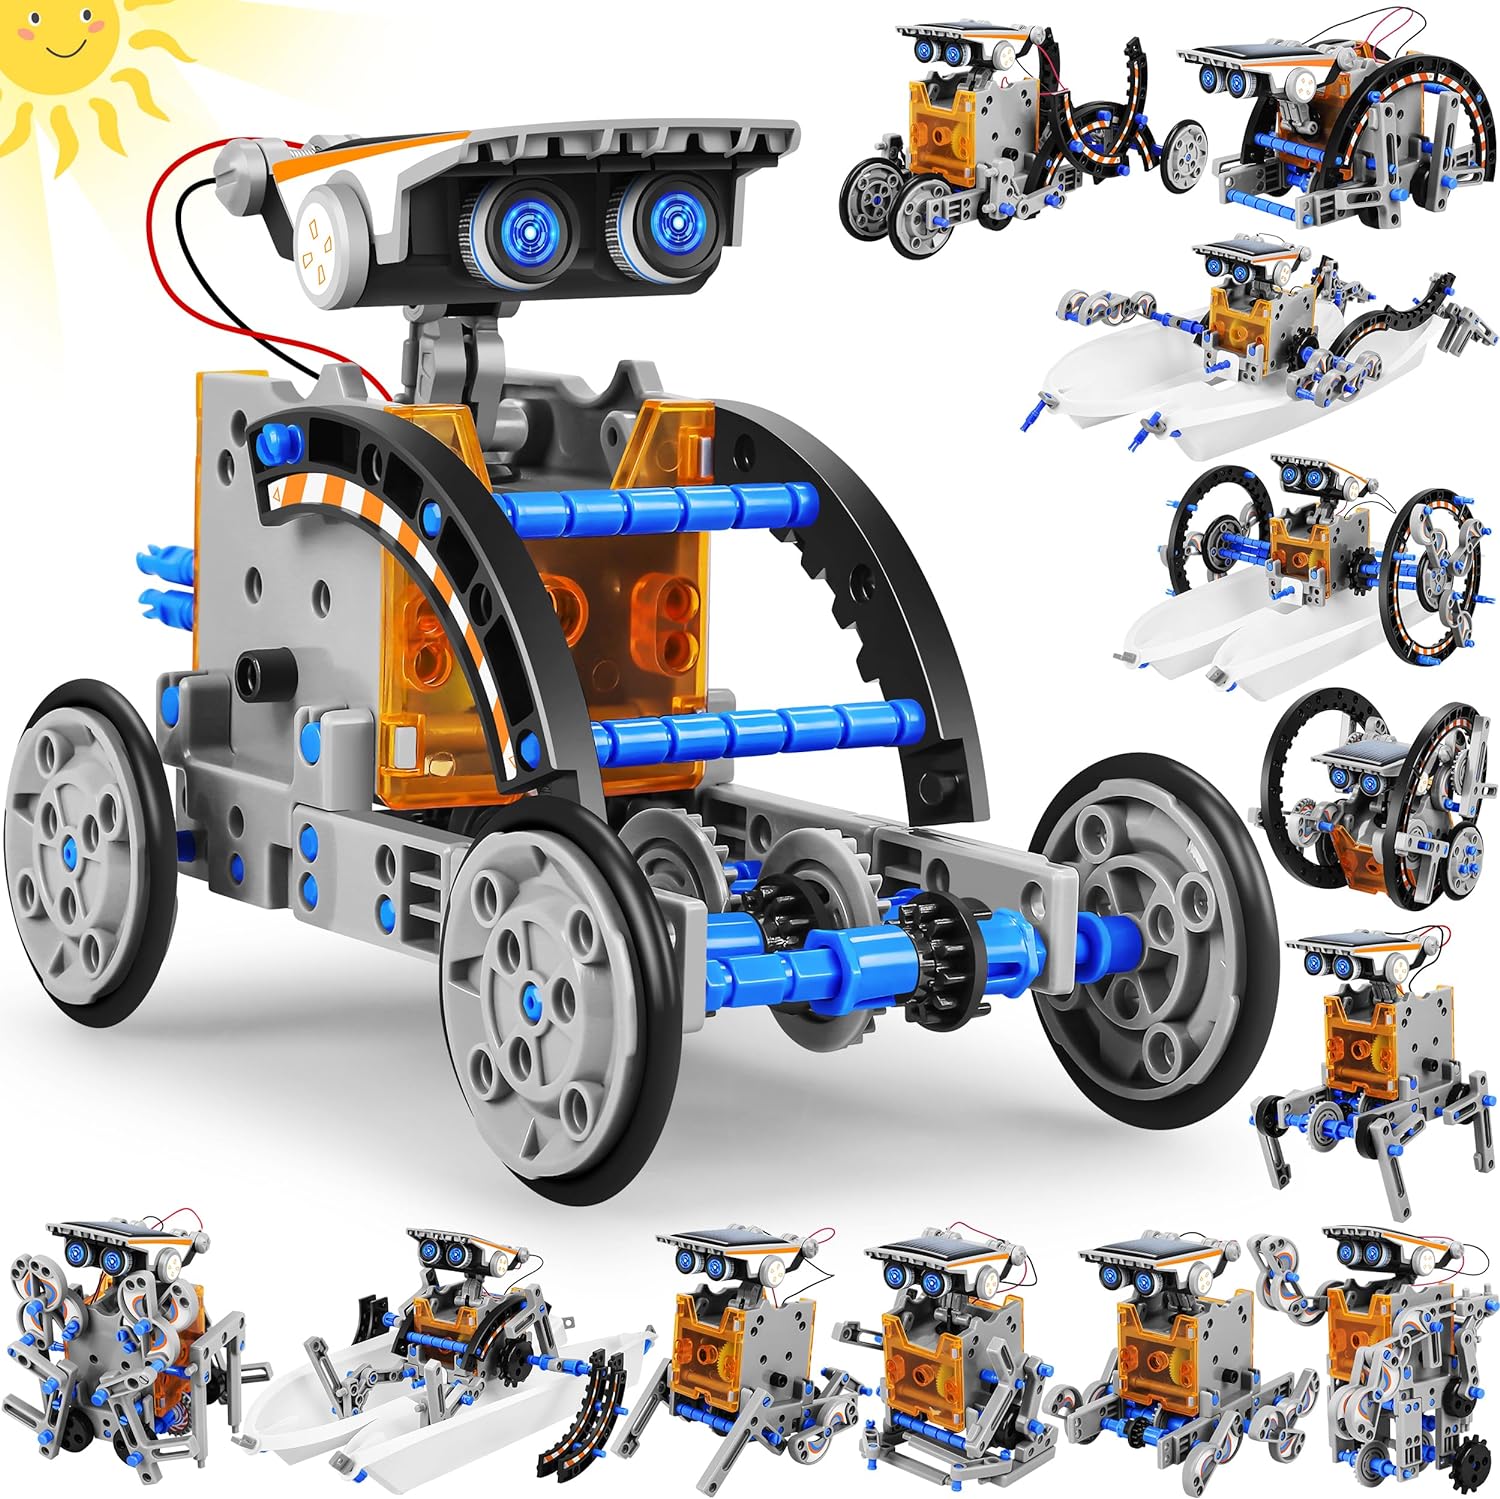 STEM 13-in-1 Education Solar Power Robots Toys for Boys Age 8-12, Educational Toy DIY Science Kits